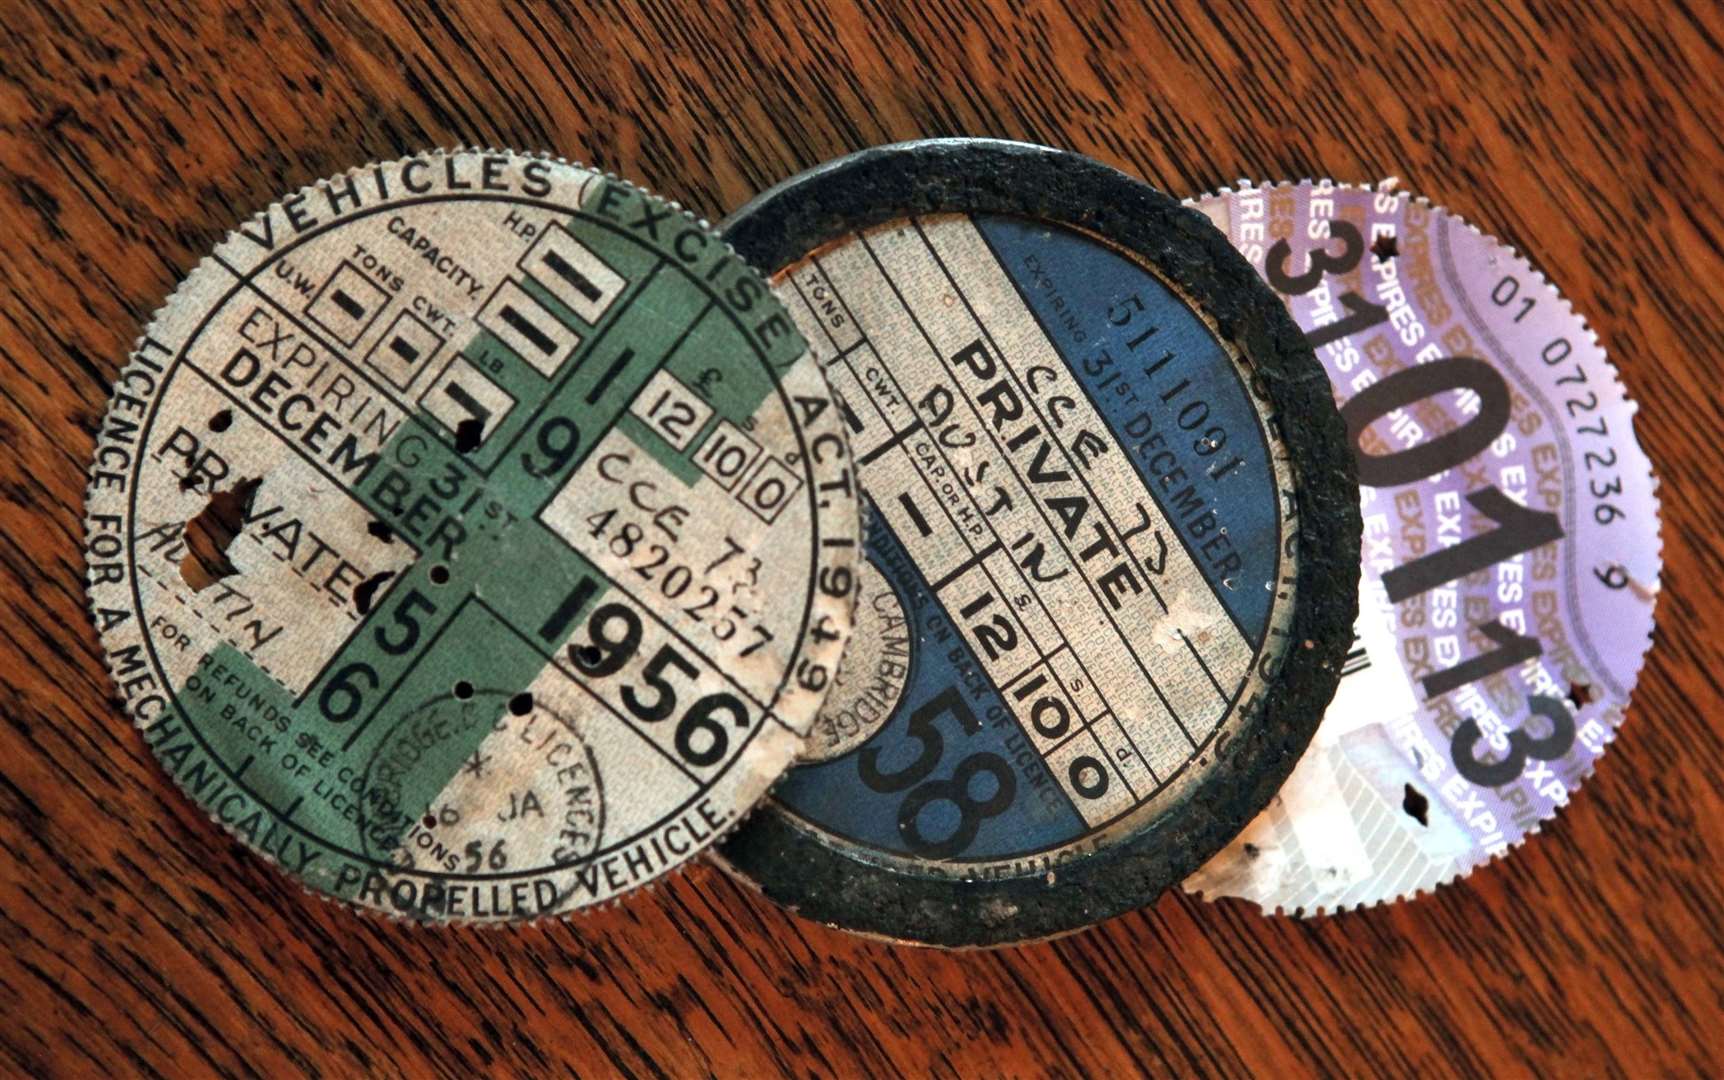 Tax discs old and new are now being sold and traded online